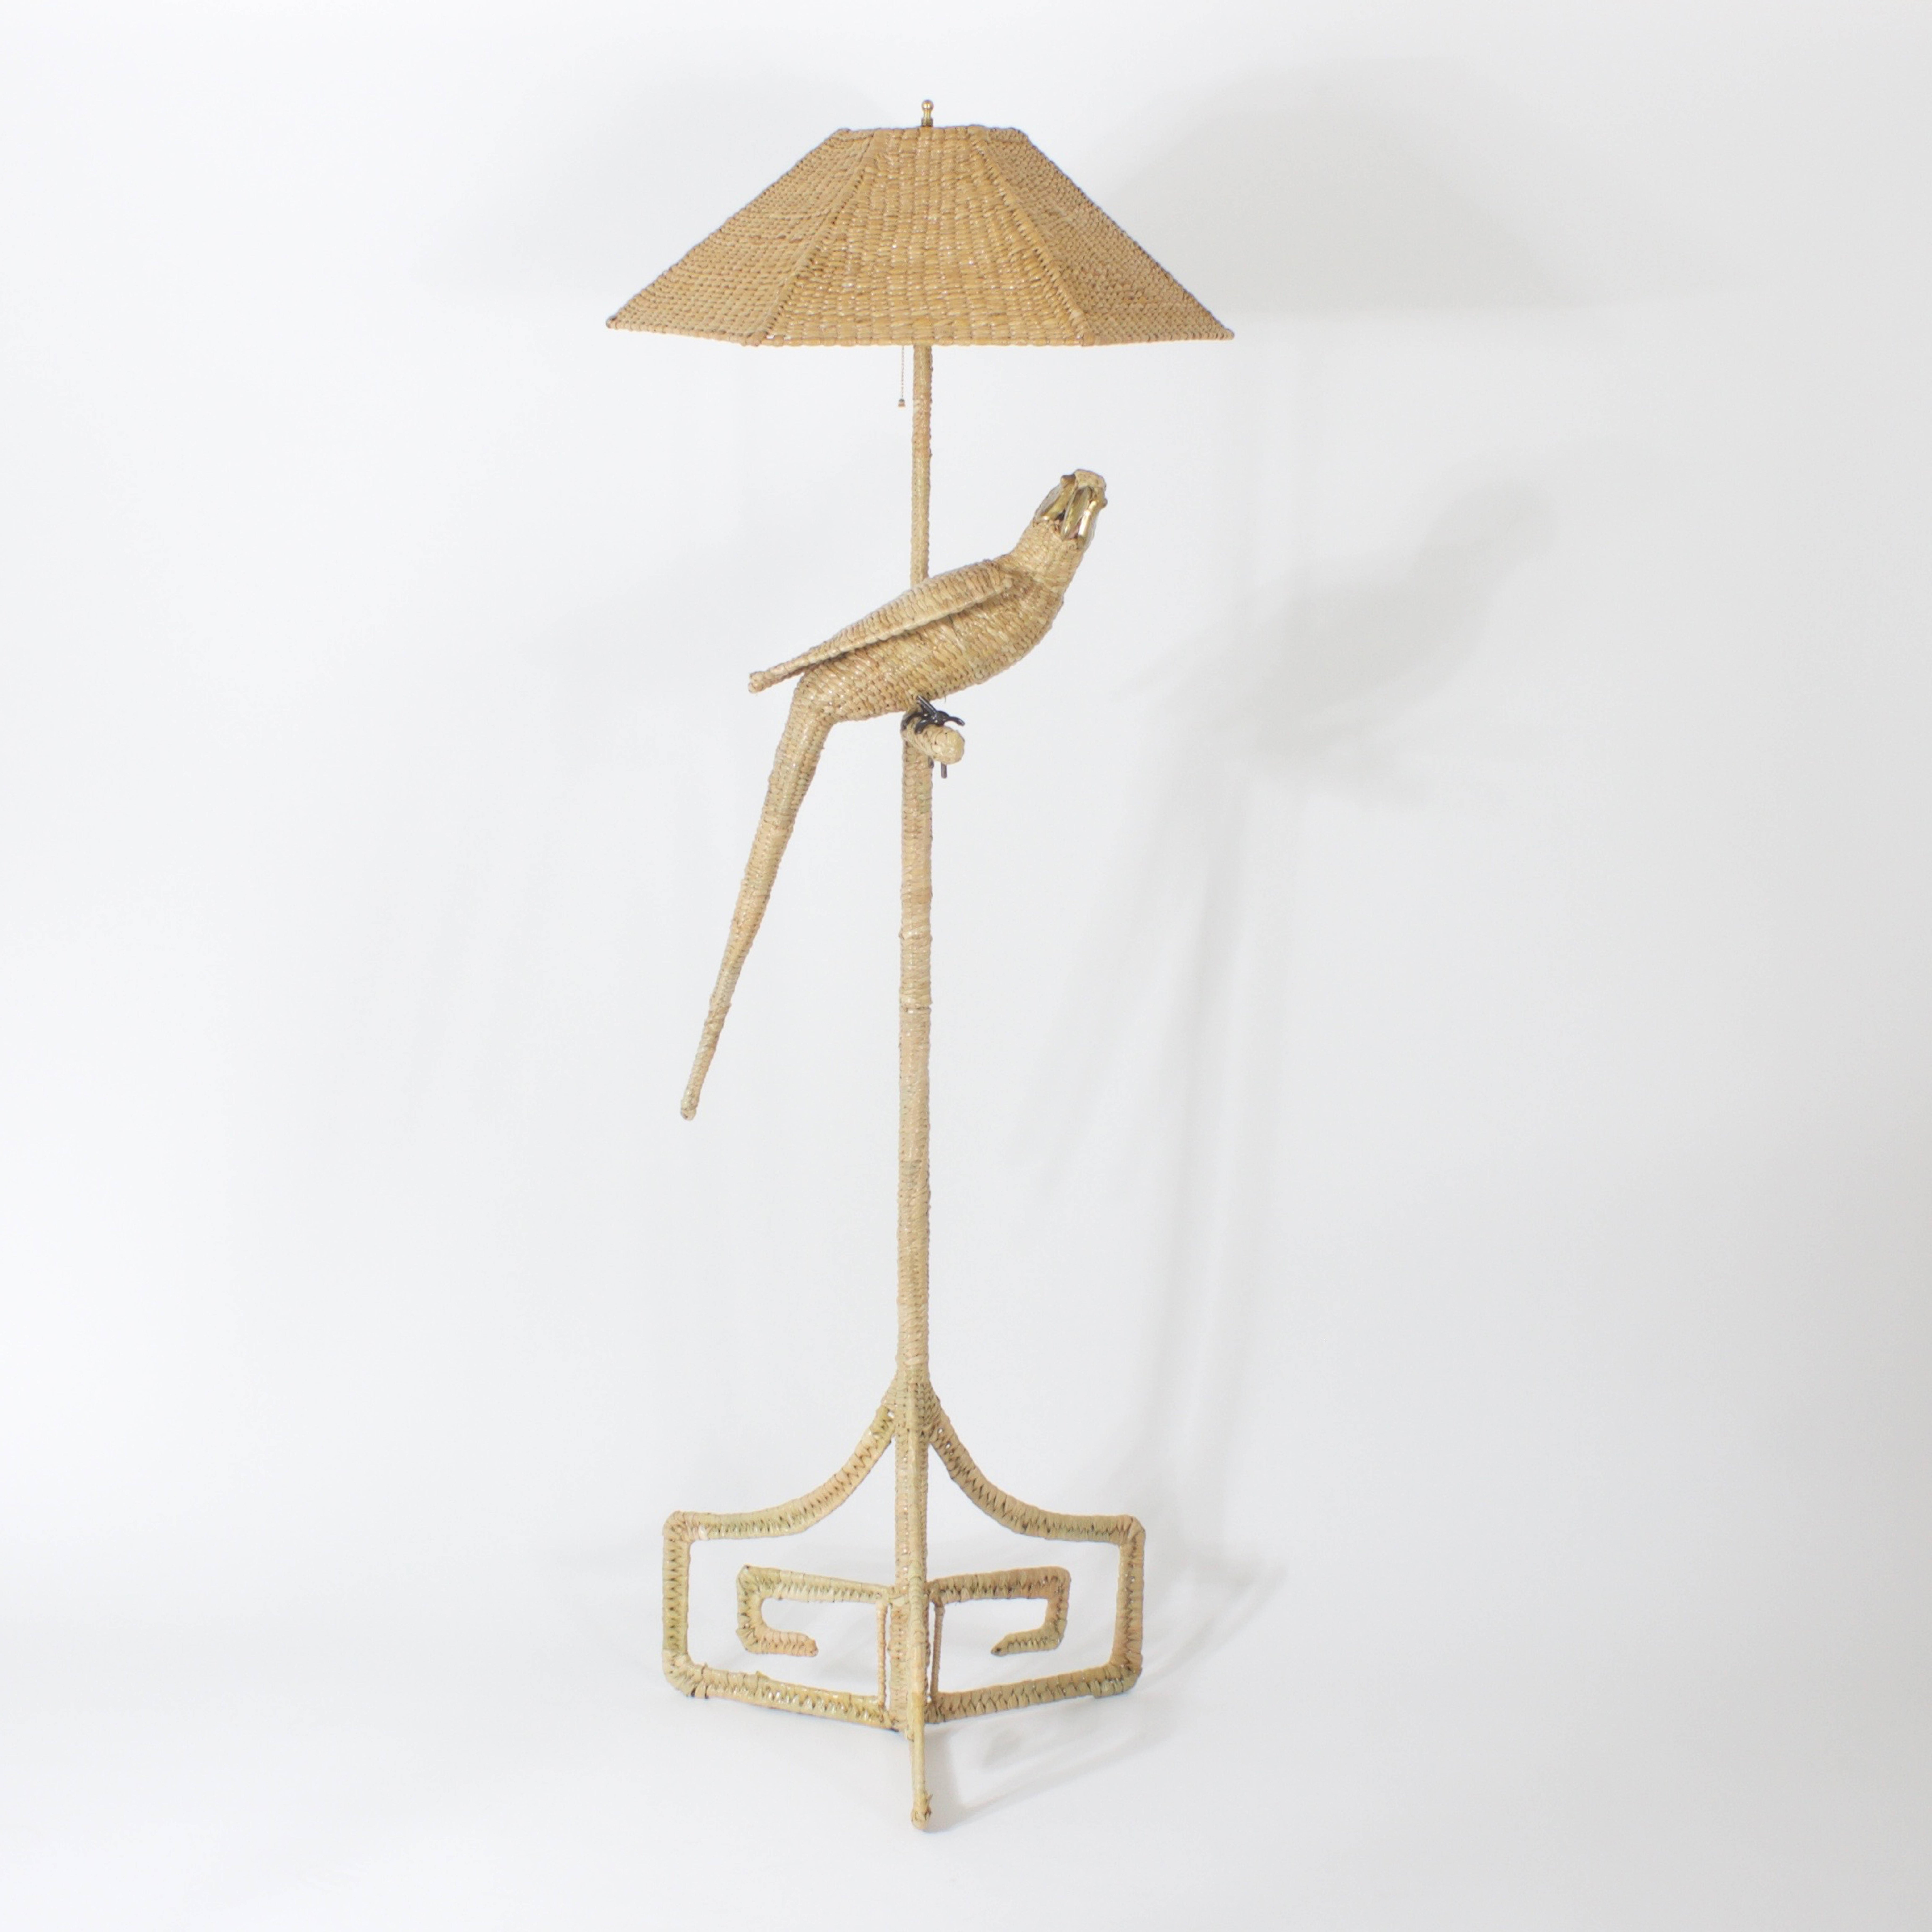 Whimsical wicker or reed Parrot floor lamp with a brass and copper beak and brass face. Featuring a matching wicker shade and a 3 legged Greek key style base. All executed in a tight declined weave. Signed Mario Torres 1974 made in Mexico.
        